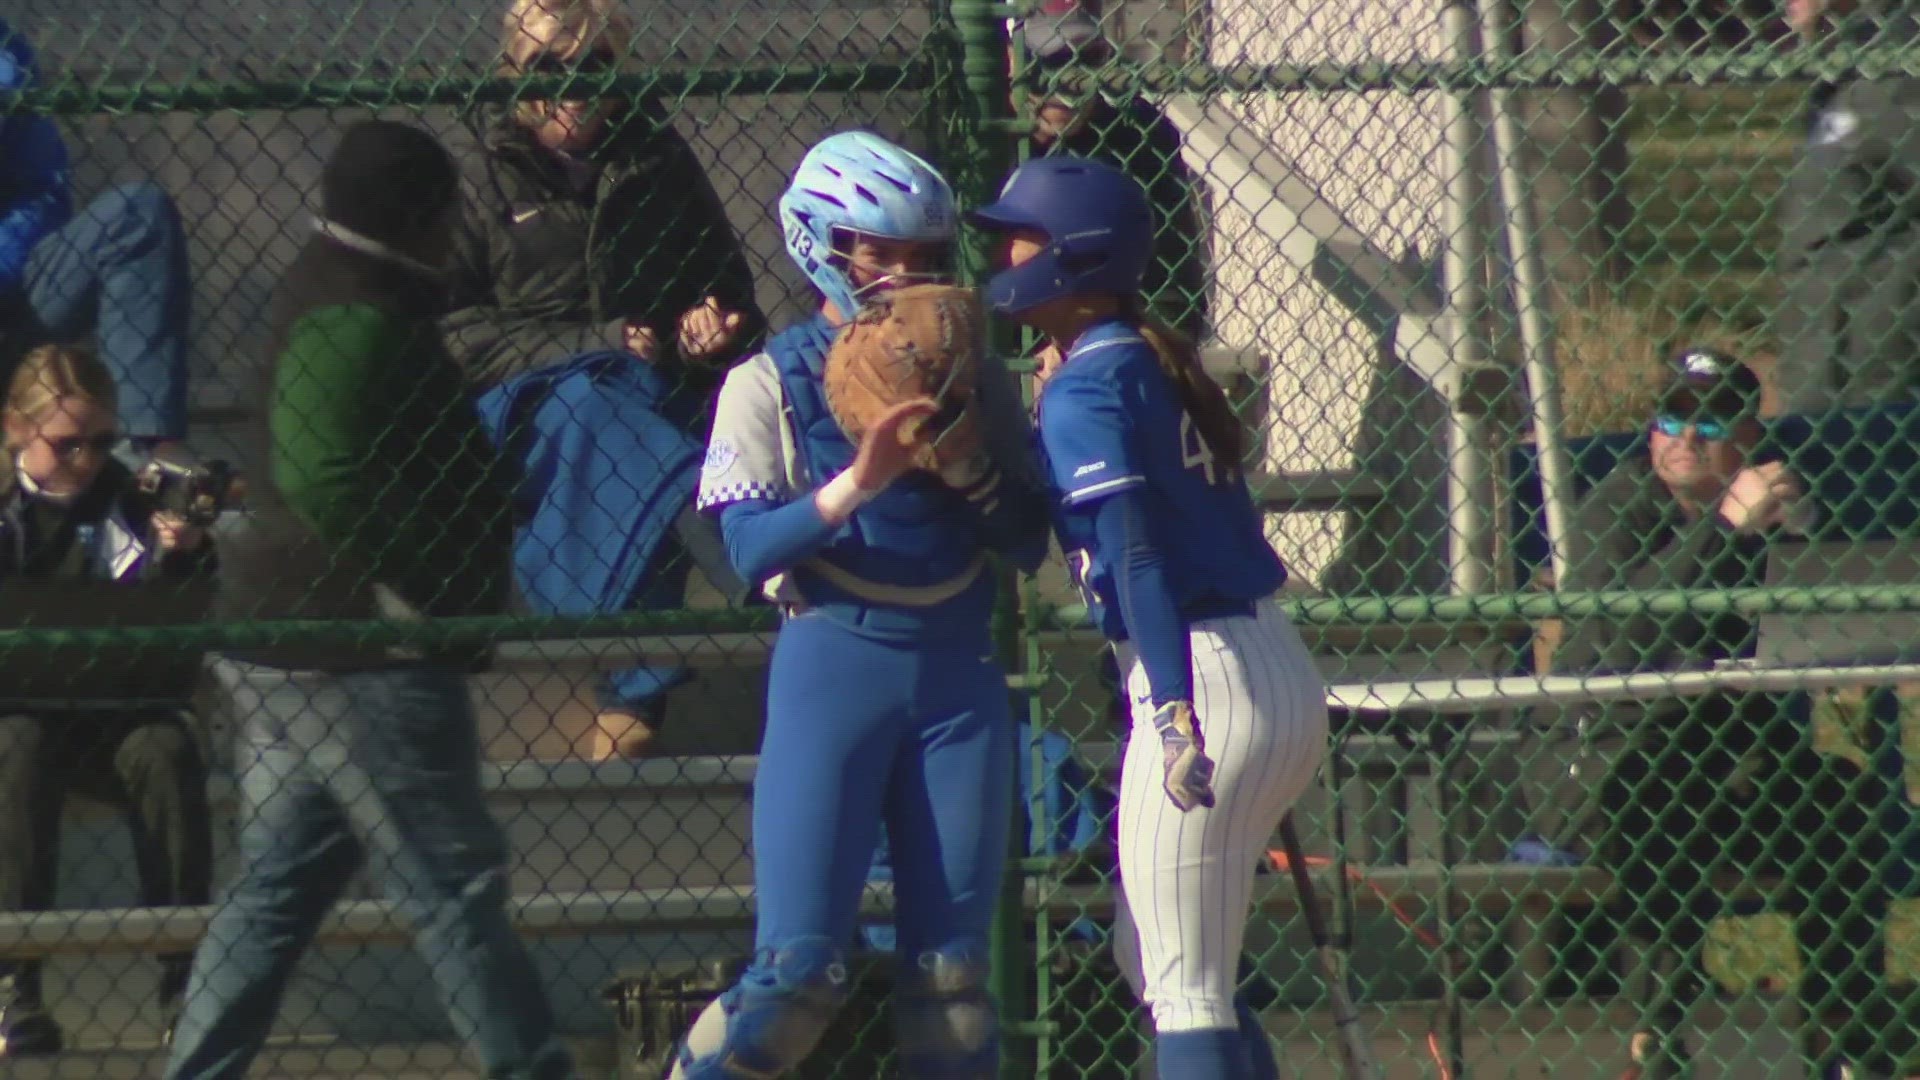 The Kowalik sisters faced off as Kentucky came to town to battle SLU.